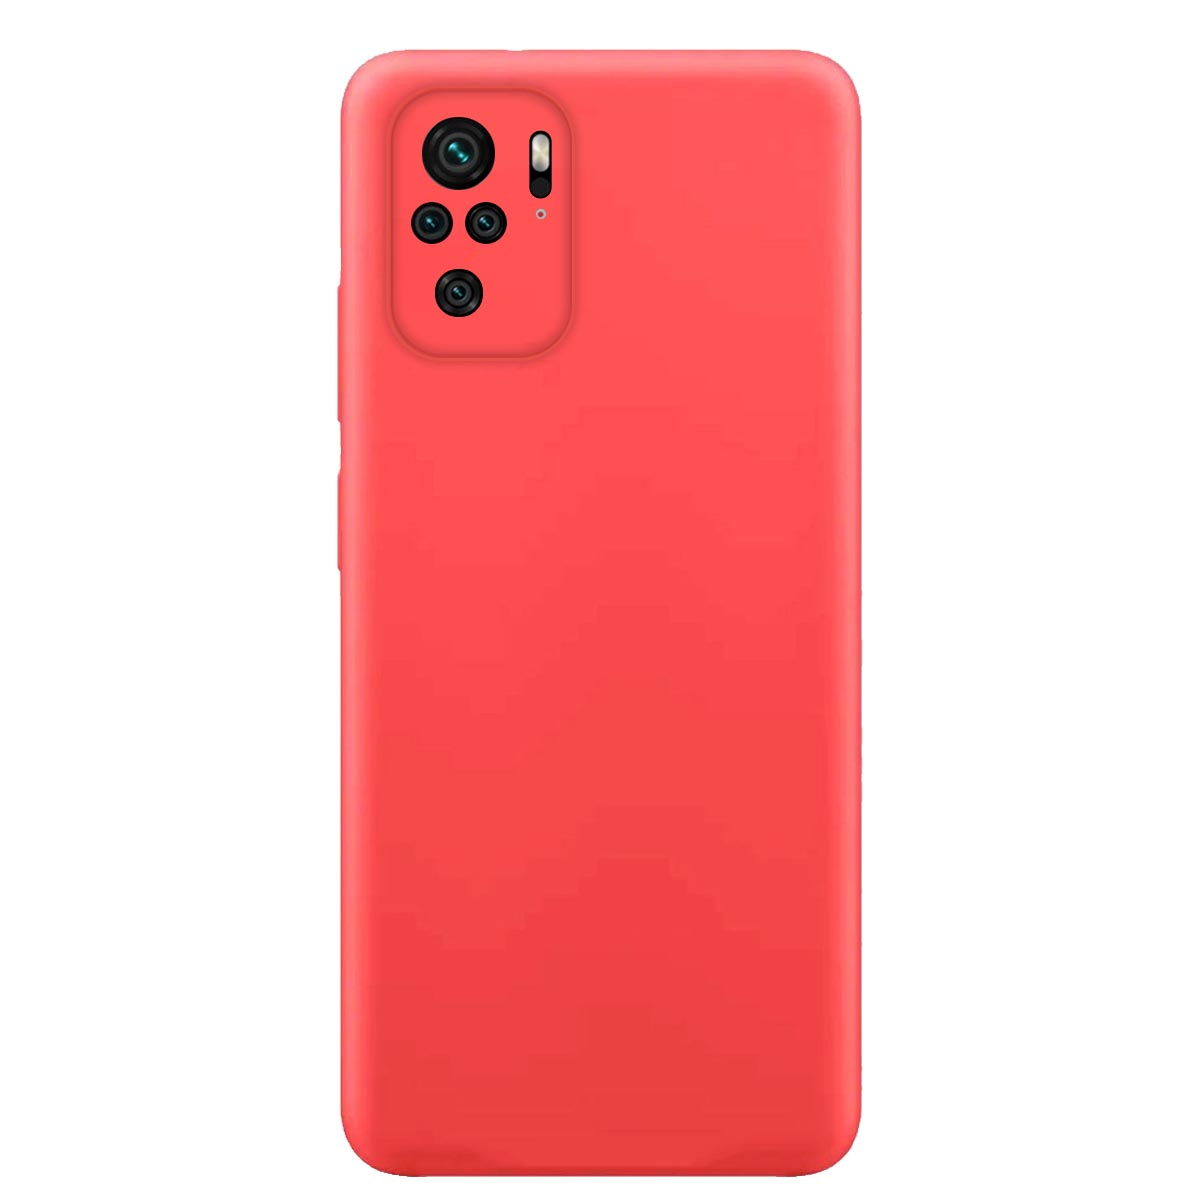 MTB MORE Case, Xiaomi, 4G, ENERGY 10S, Note Silikon Rot Soft Backcover, Redmi Redmi Note 10